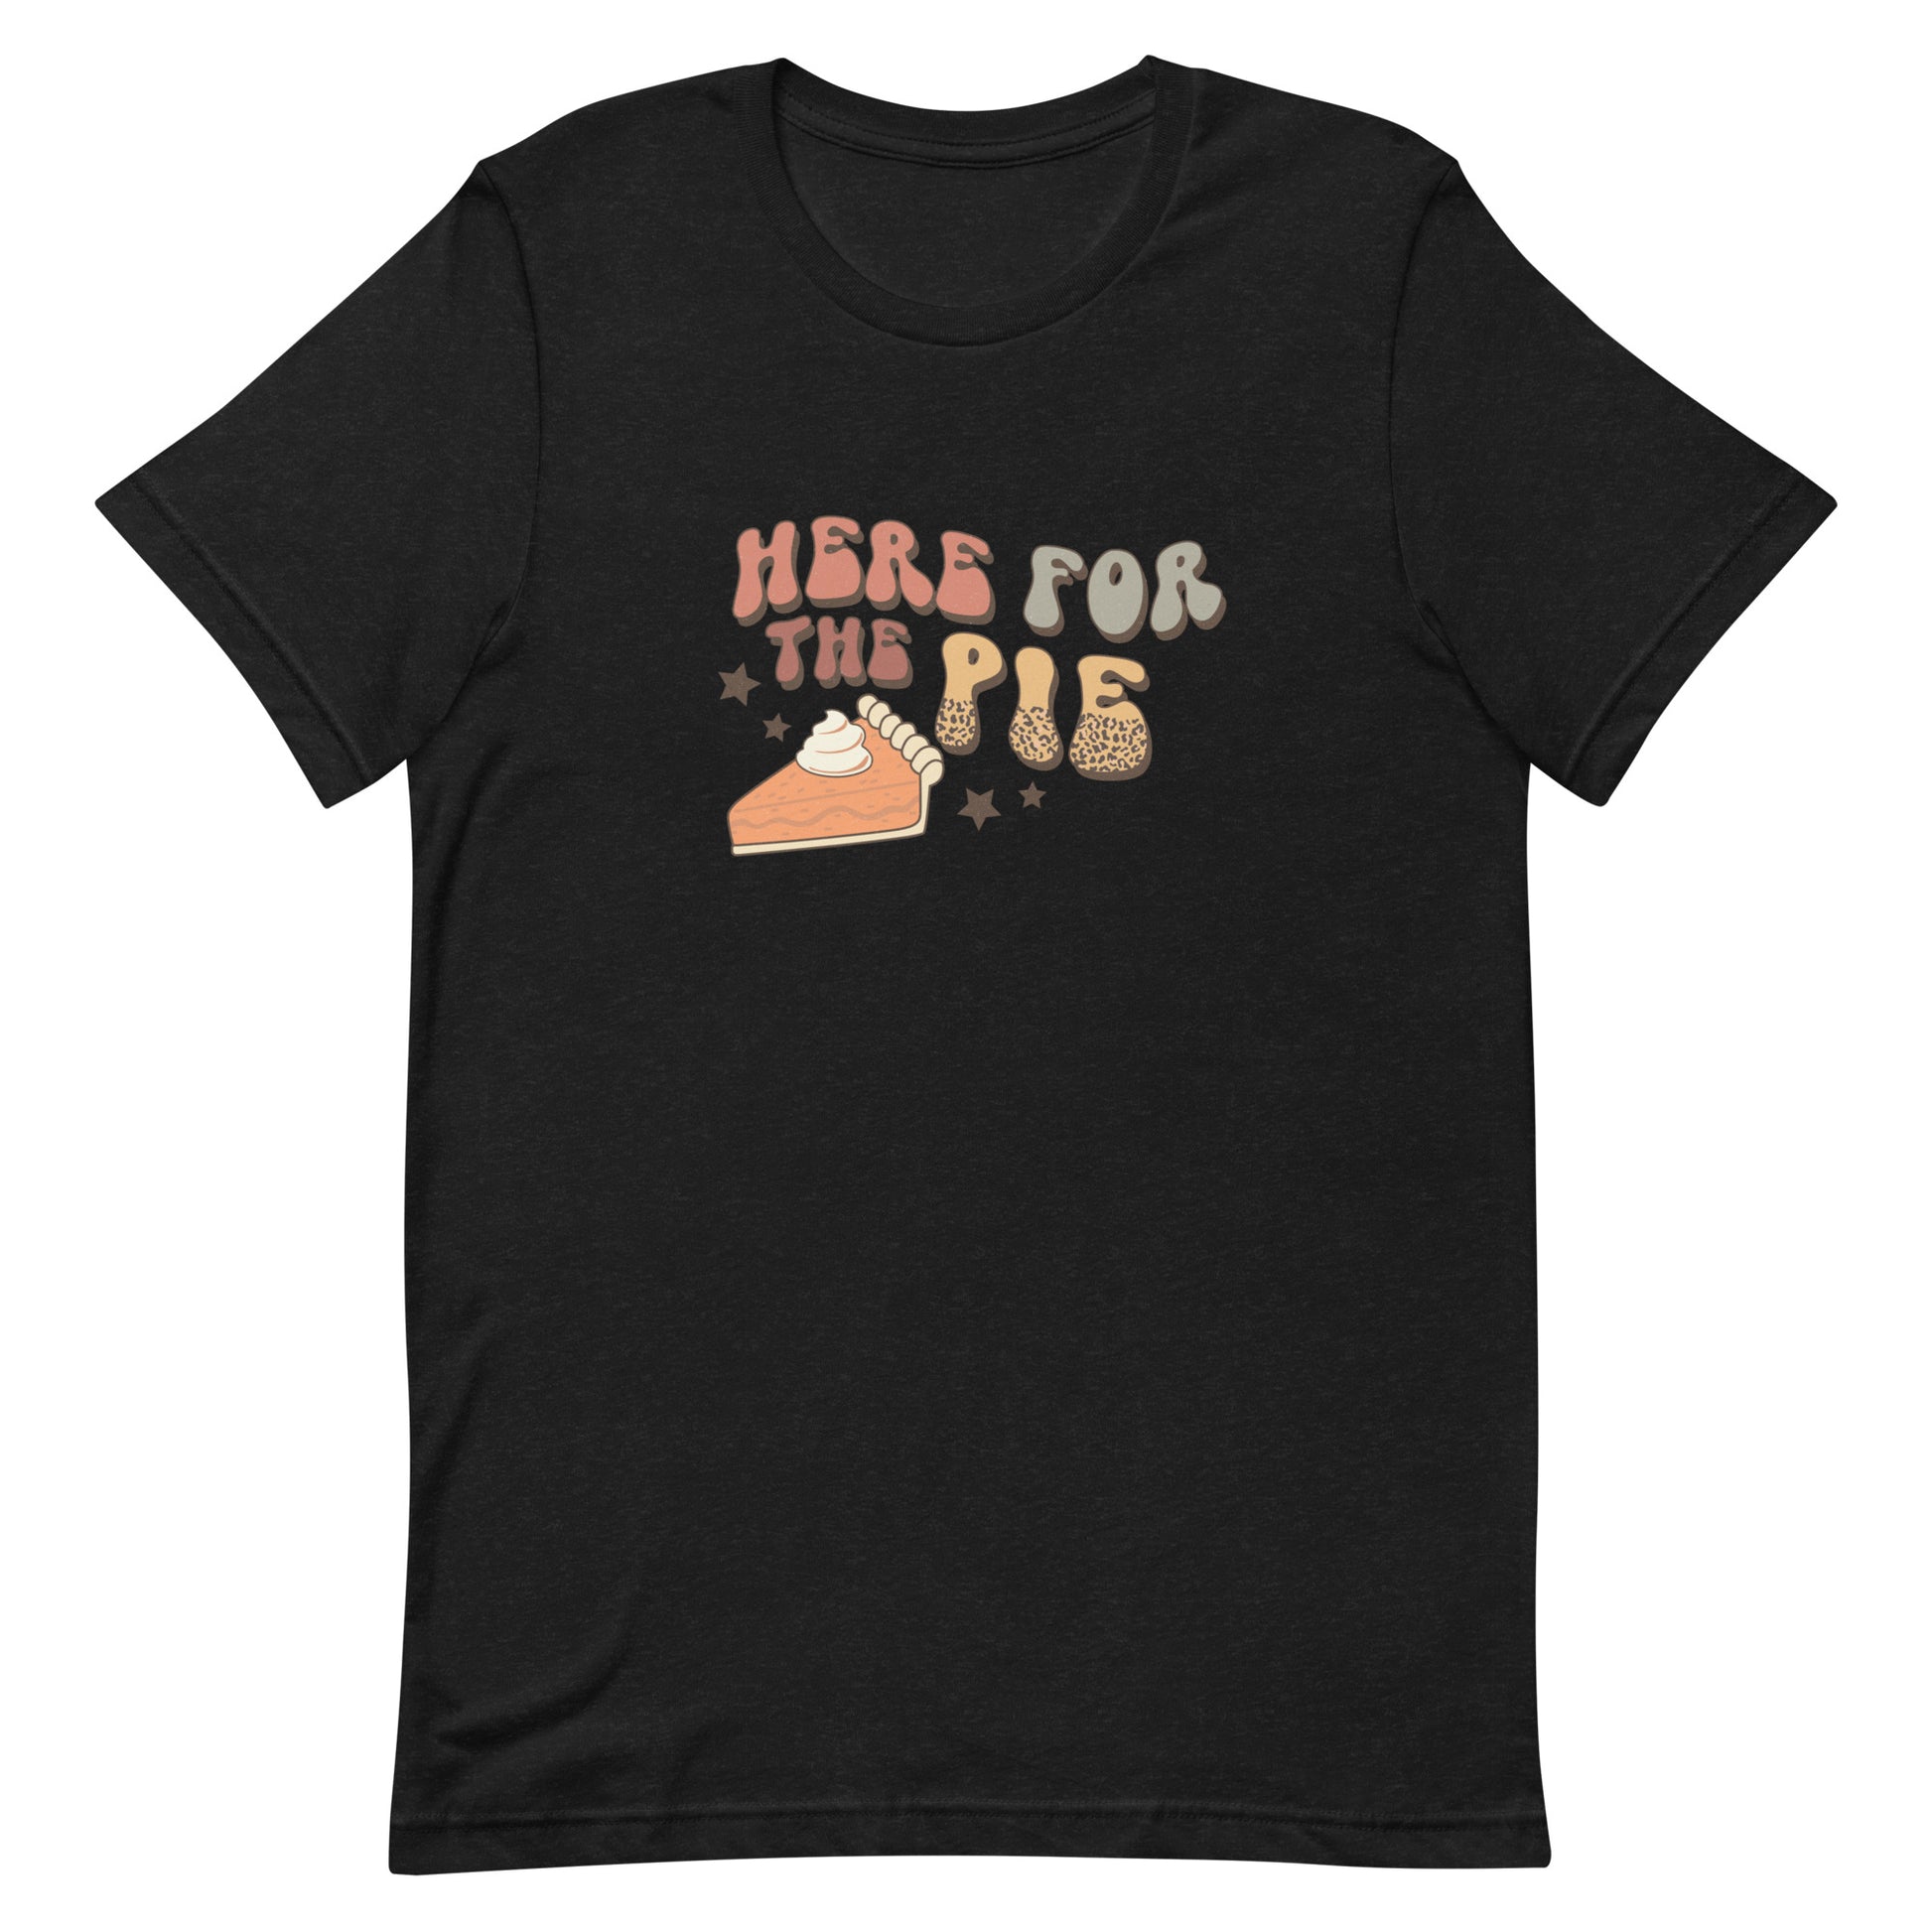 Here for the Pies Unisex Tshirt - Thanksgivng